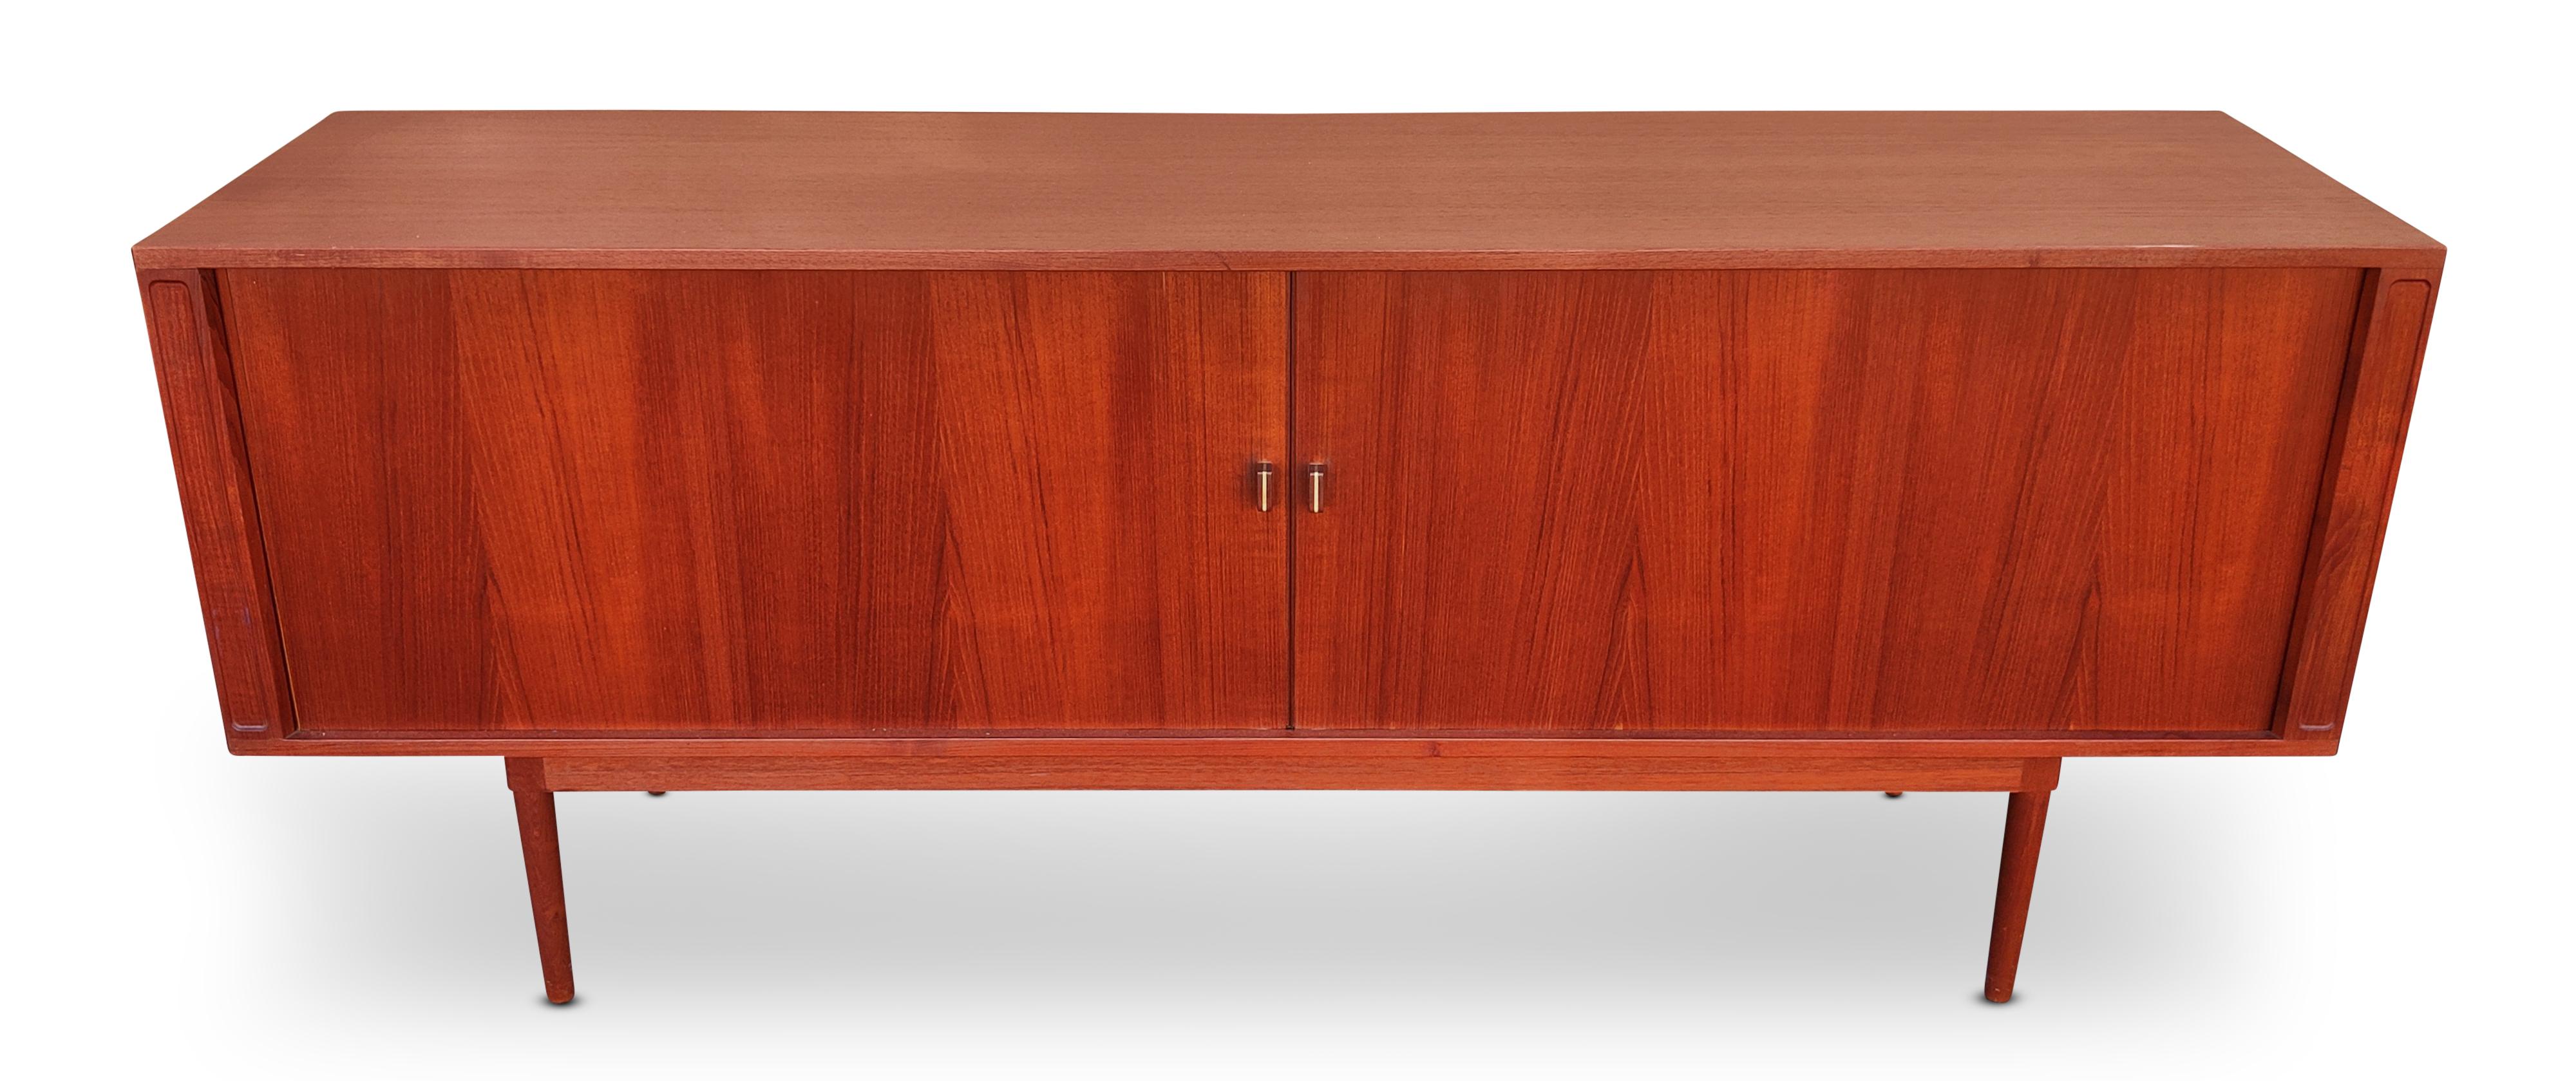 Elegant credenza designed and manufactured by Peter Løvig Nielsen in Denmark, dated 1965. Featuring a teak wood construction with seamless tambour doors adorned with subtle aluminum-accented pulls. The doors open smoothly to reveal ample storage